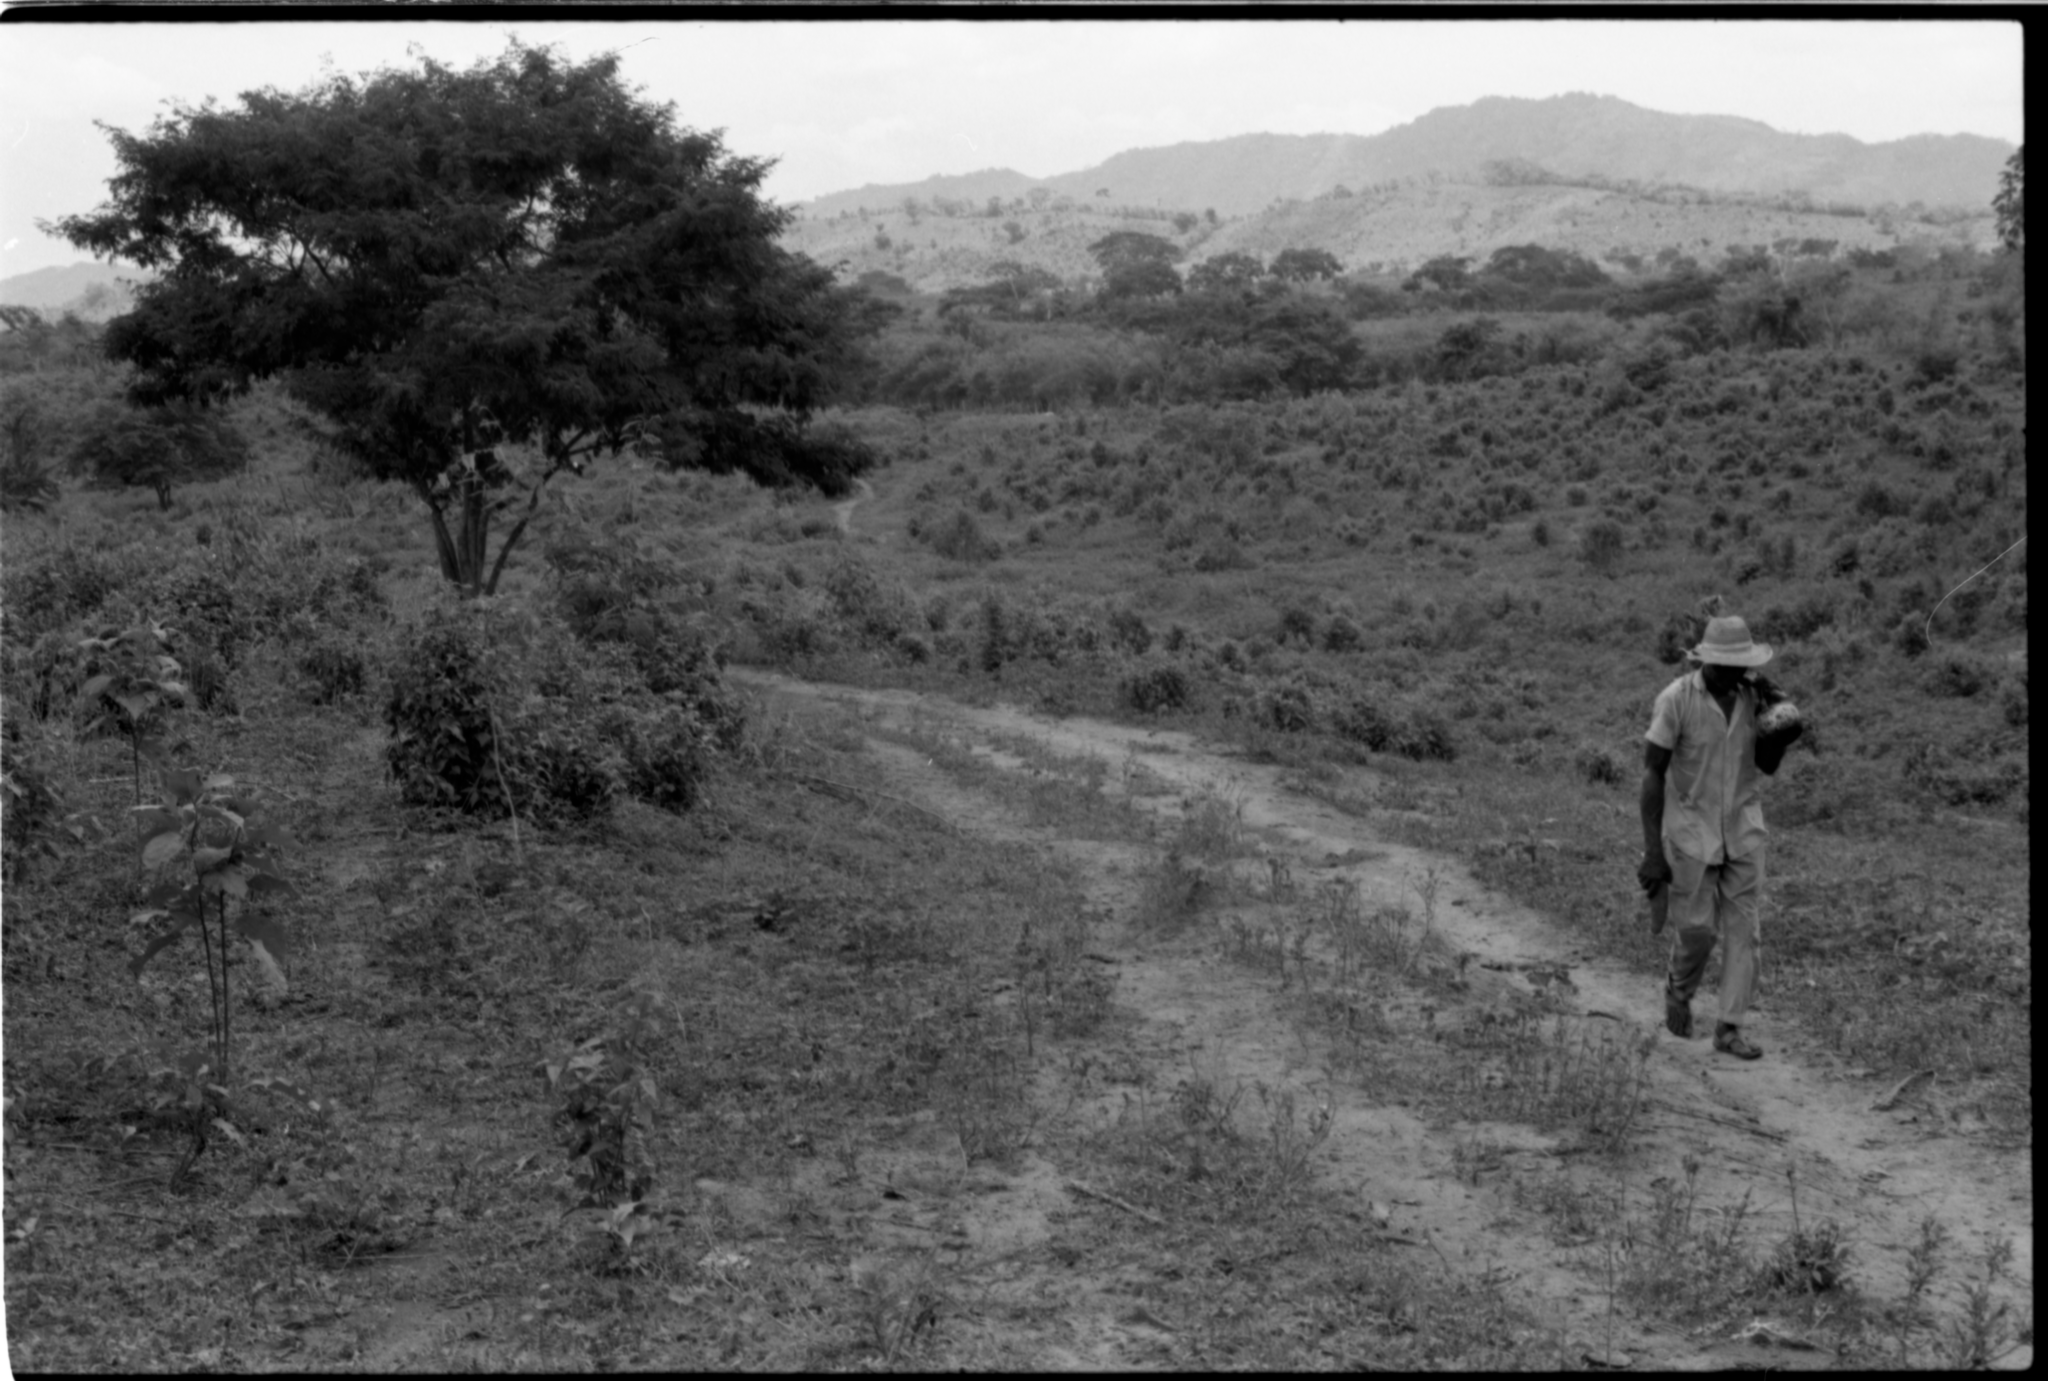 A man walking away from the landscape